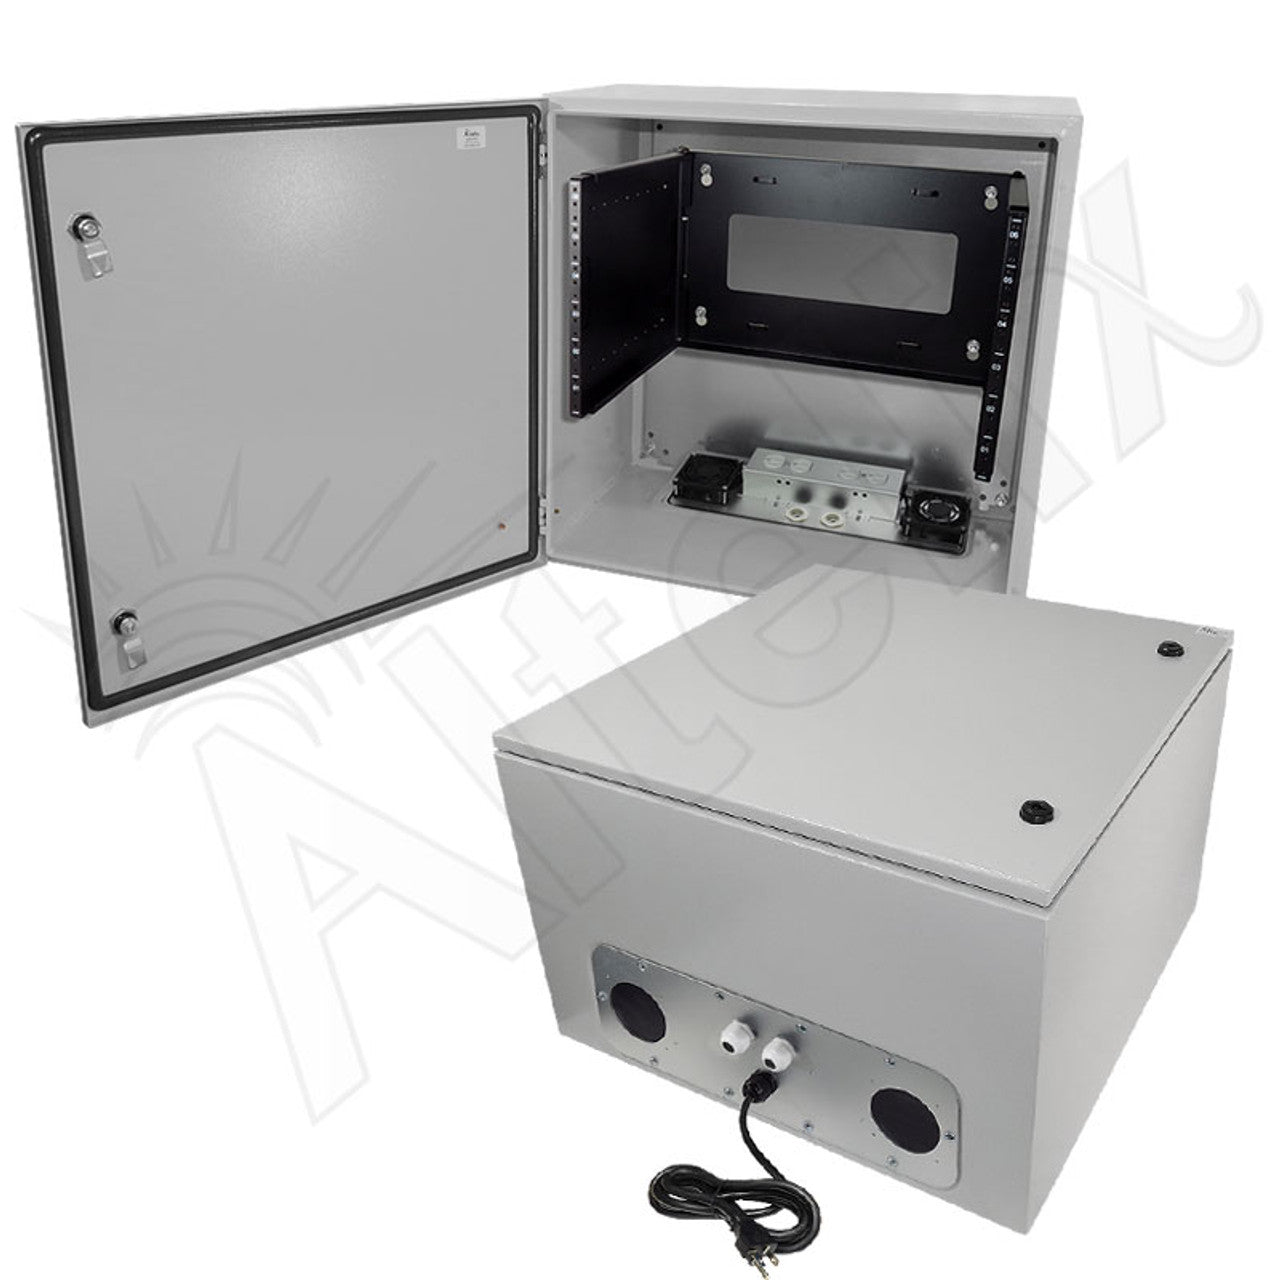 Altelix 120VAC 20A Steel NEMA Enclosure for UPS Power Systems with 19" Wide 6U Rack, Dual Cooling Fans, 20A Power Outlets & Power Cord-3